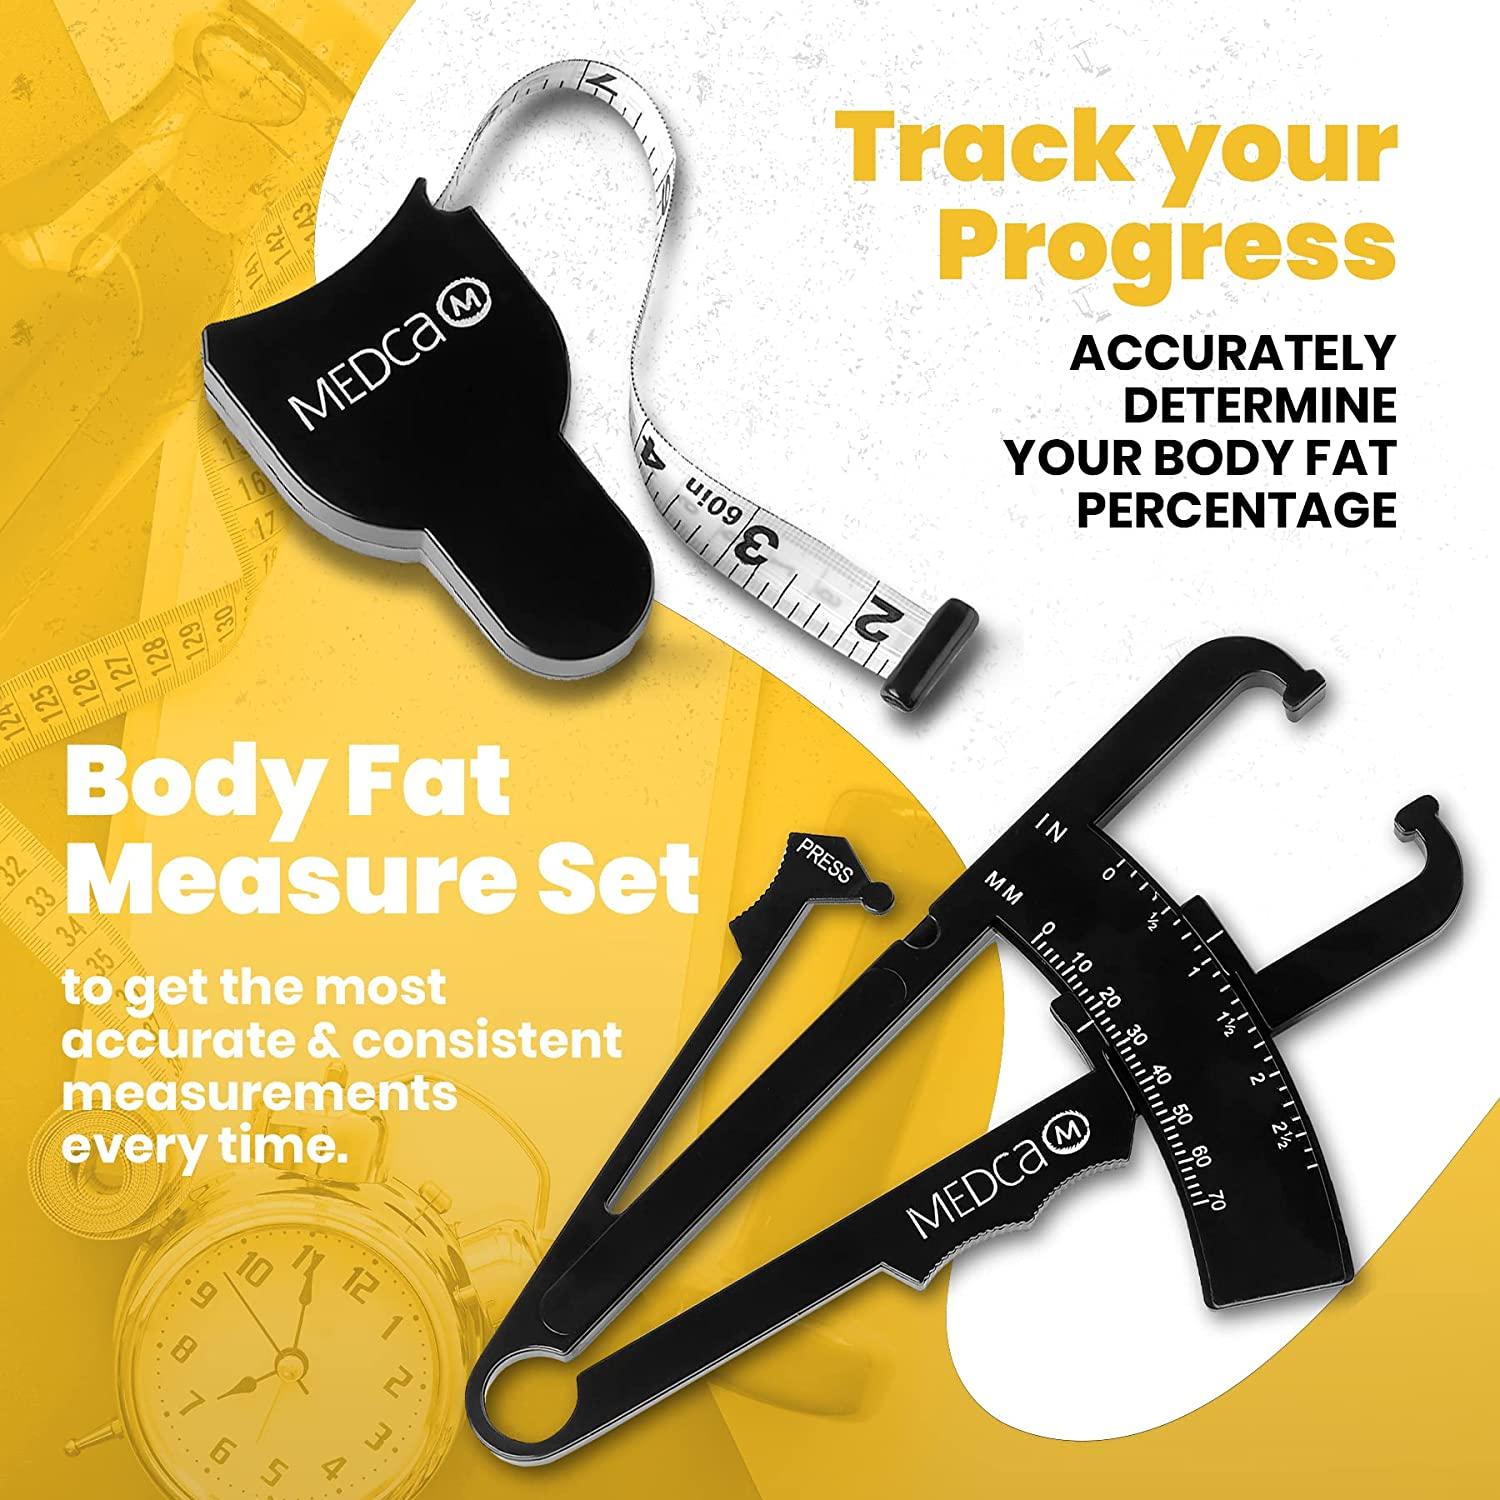 Body Fat Caliper and Measuring Tape for Body - Skinfold Calipers